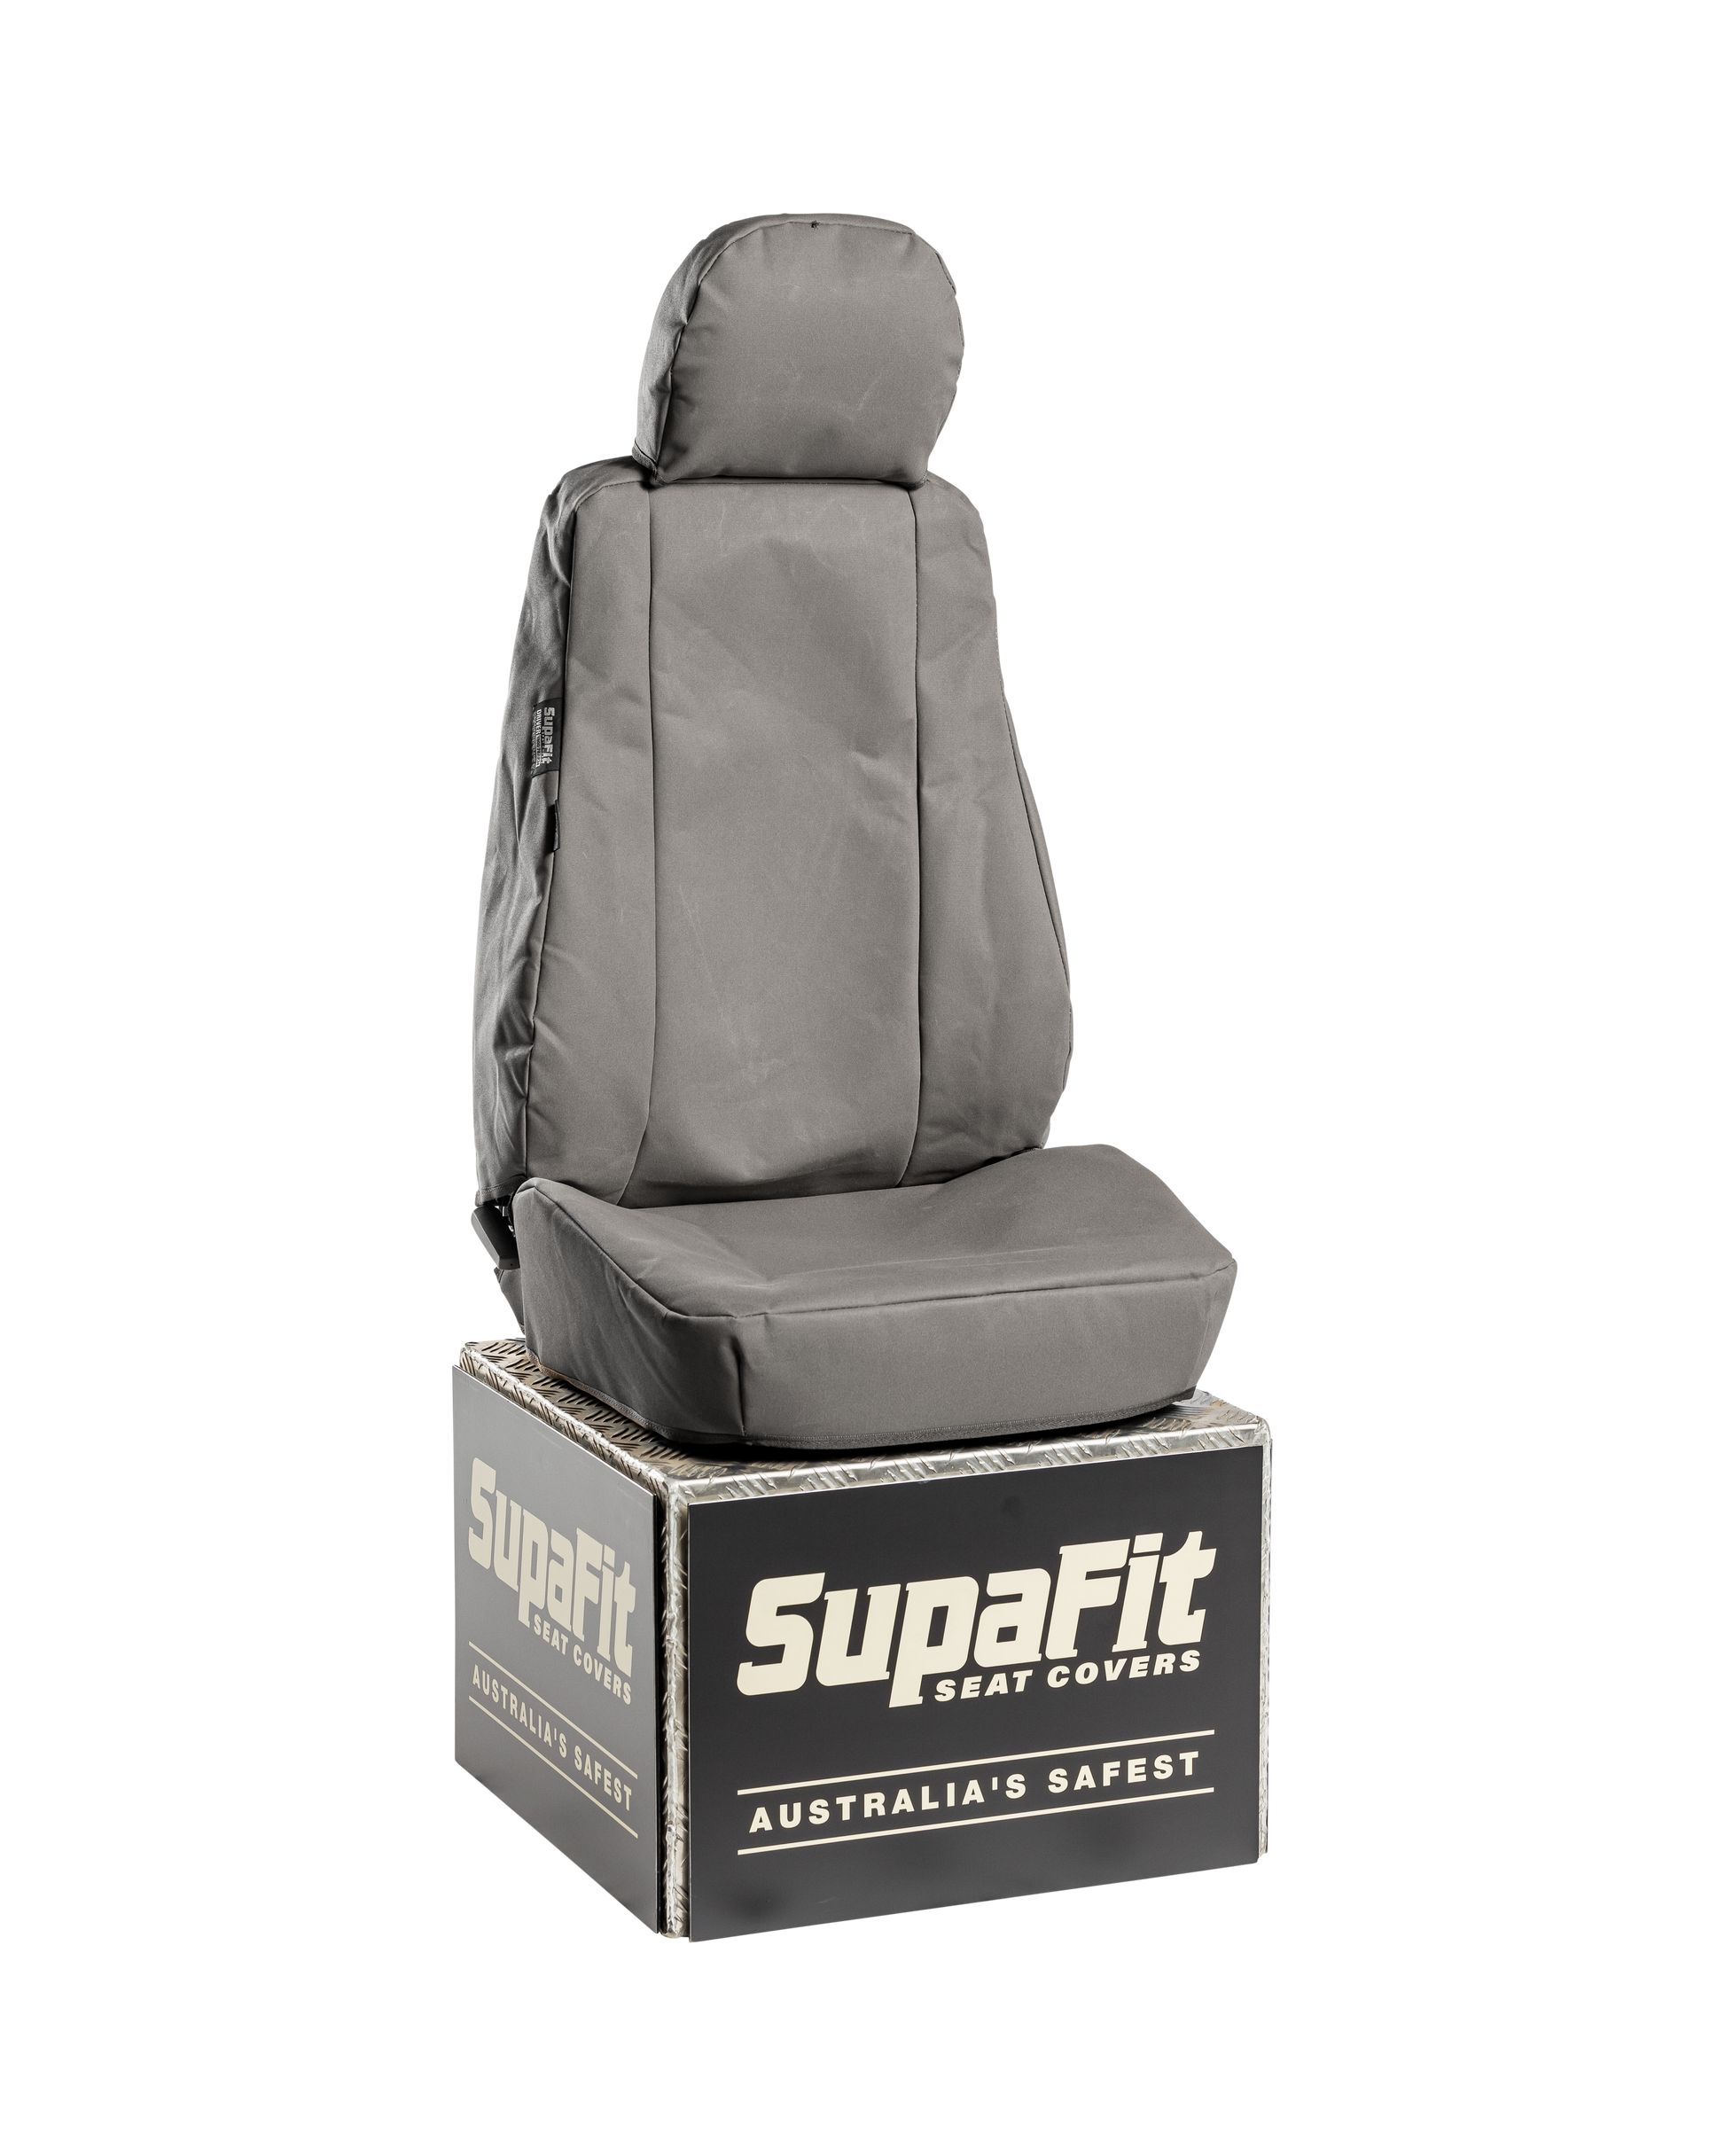 SUPAFIT Seat covers front & rear seats - Essential4x4